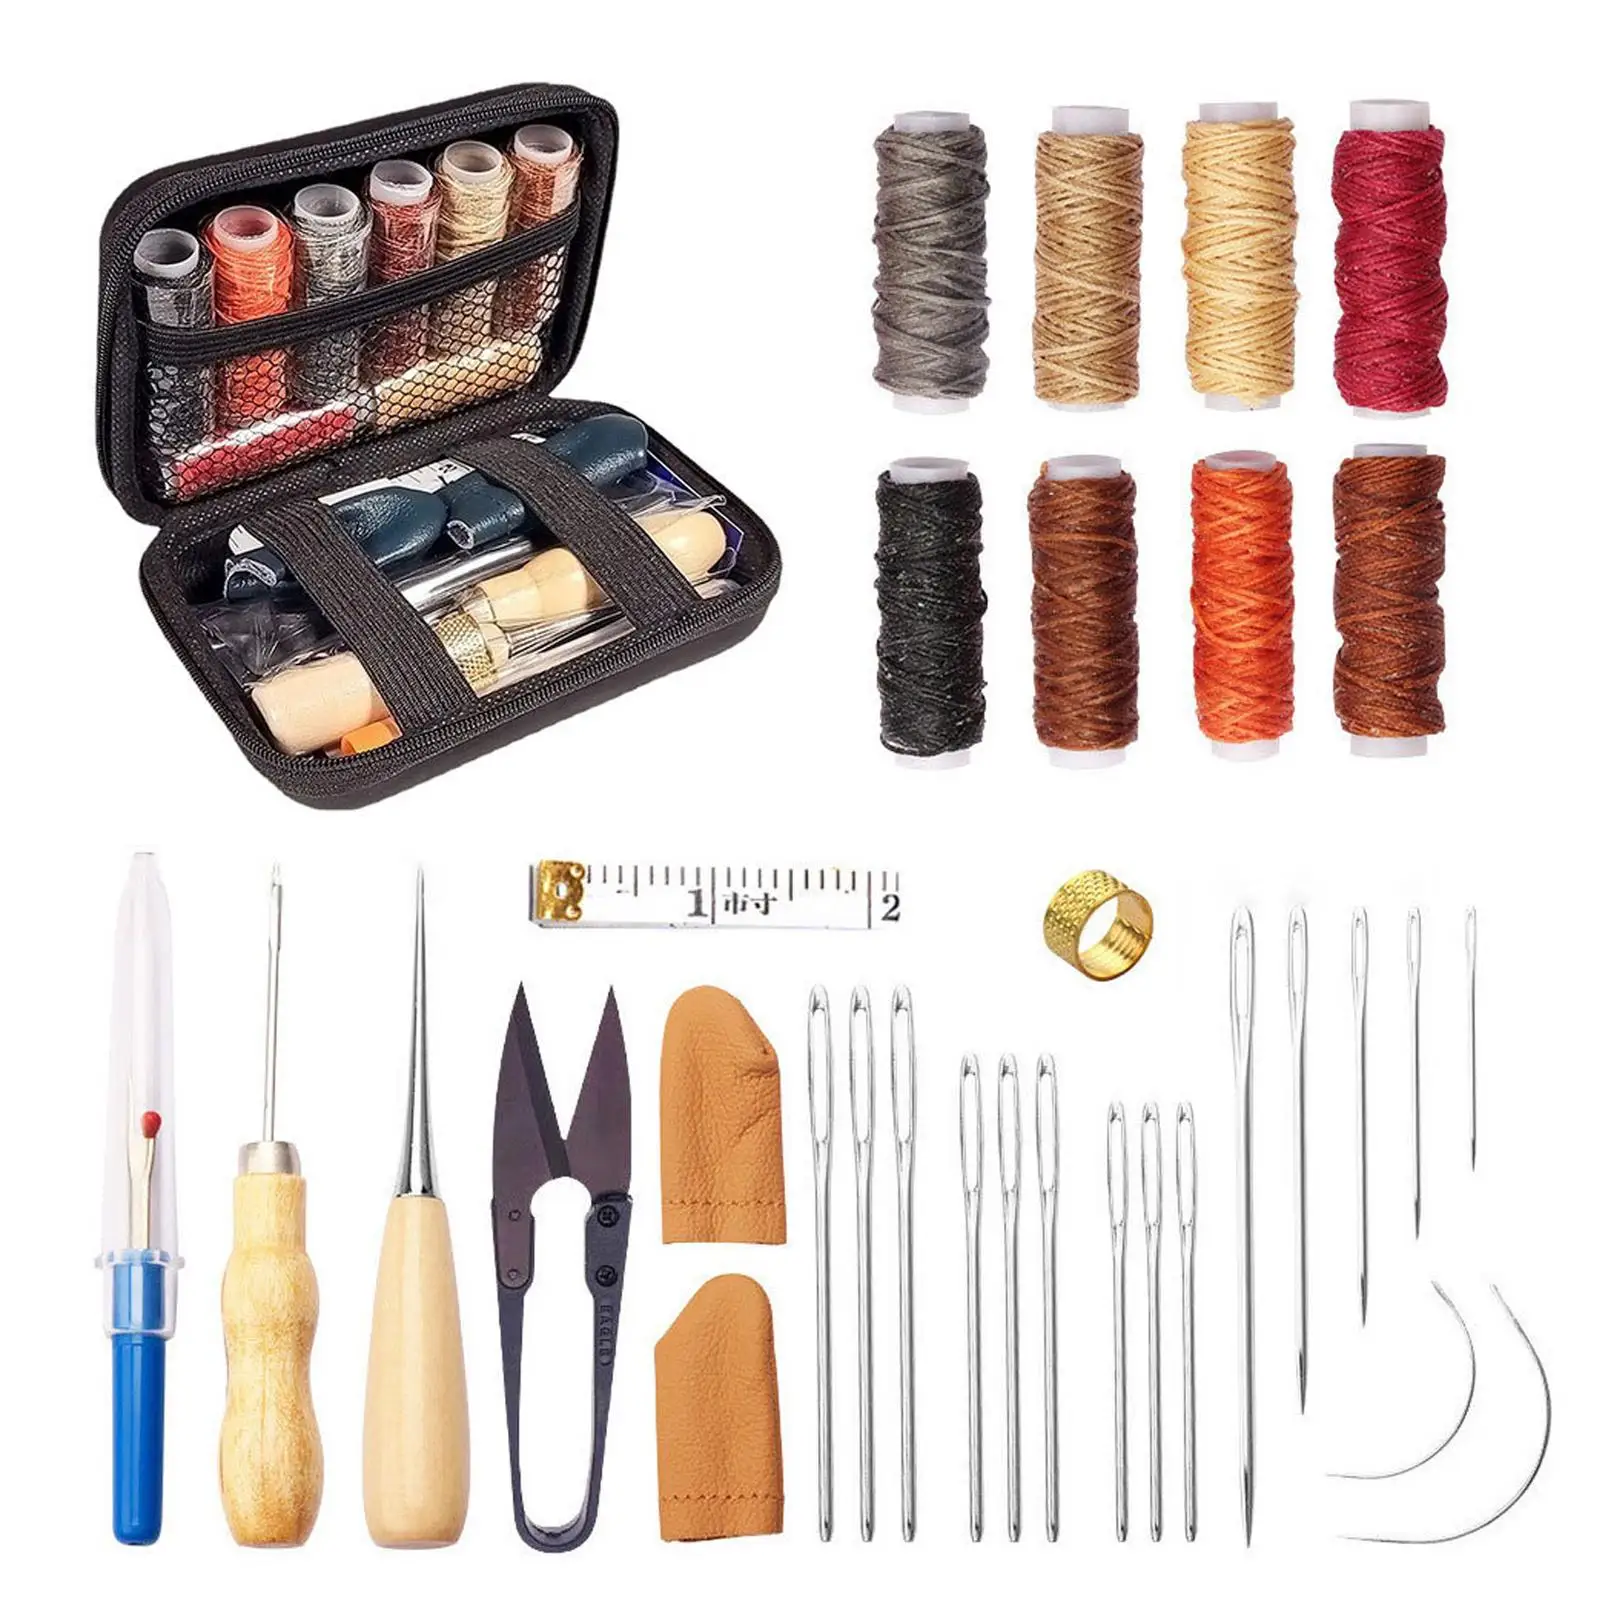 32Pcs Leather Craft Tool Kit Leather Crafting Tools and Supplies Large Eye Stitching Needles Crafting Projects Adults Gifts